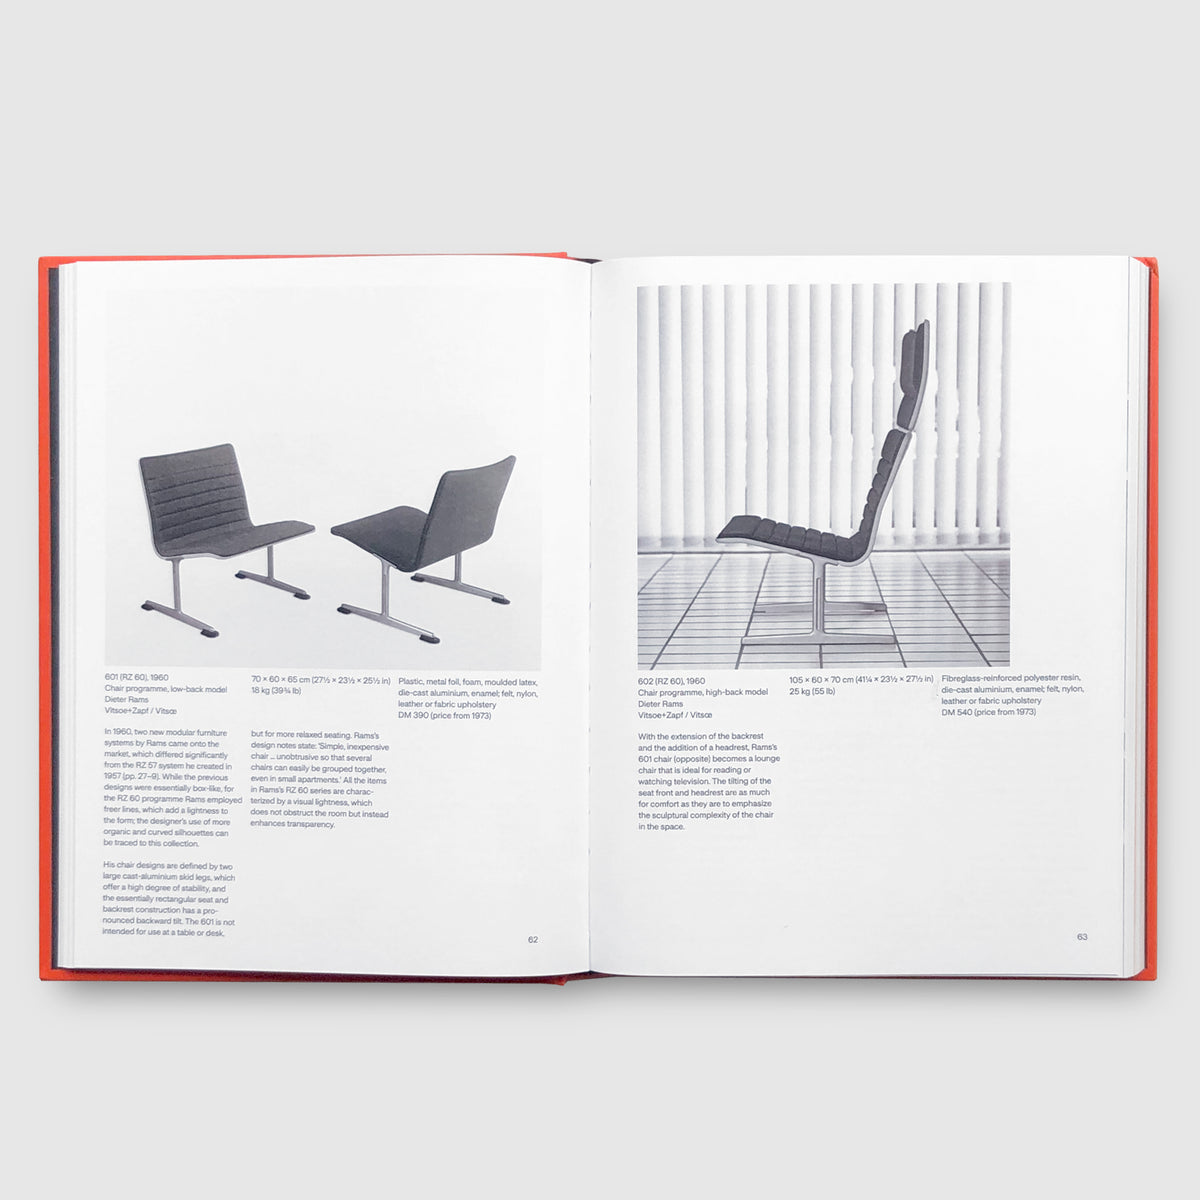 Dieter Rams | The Complete Works | Post Architecture Books